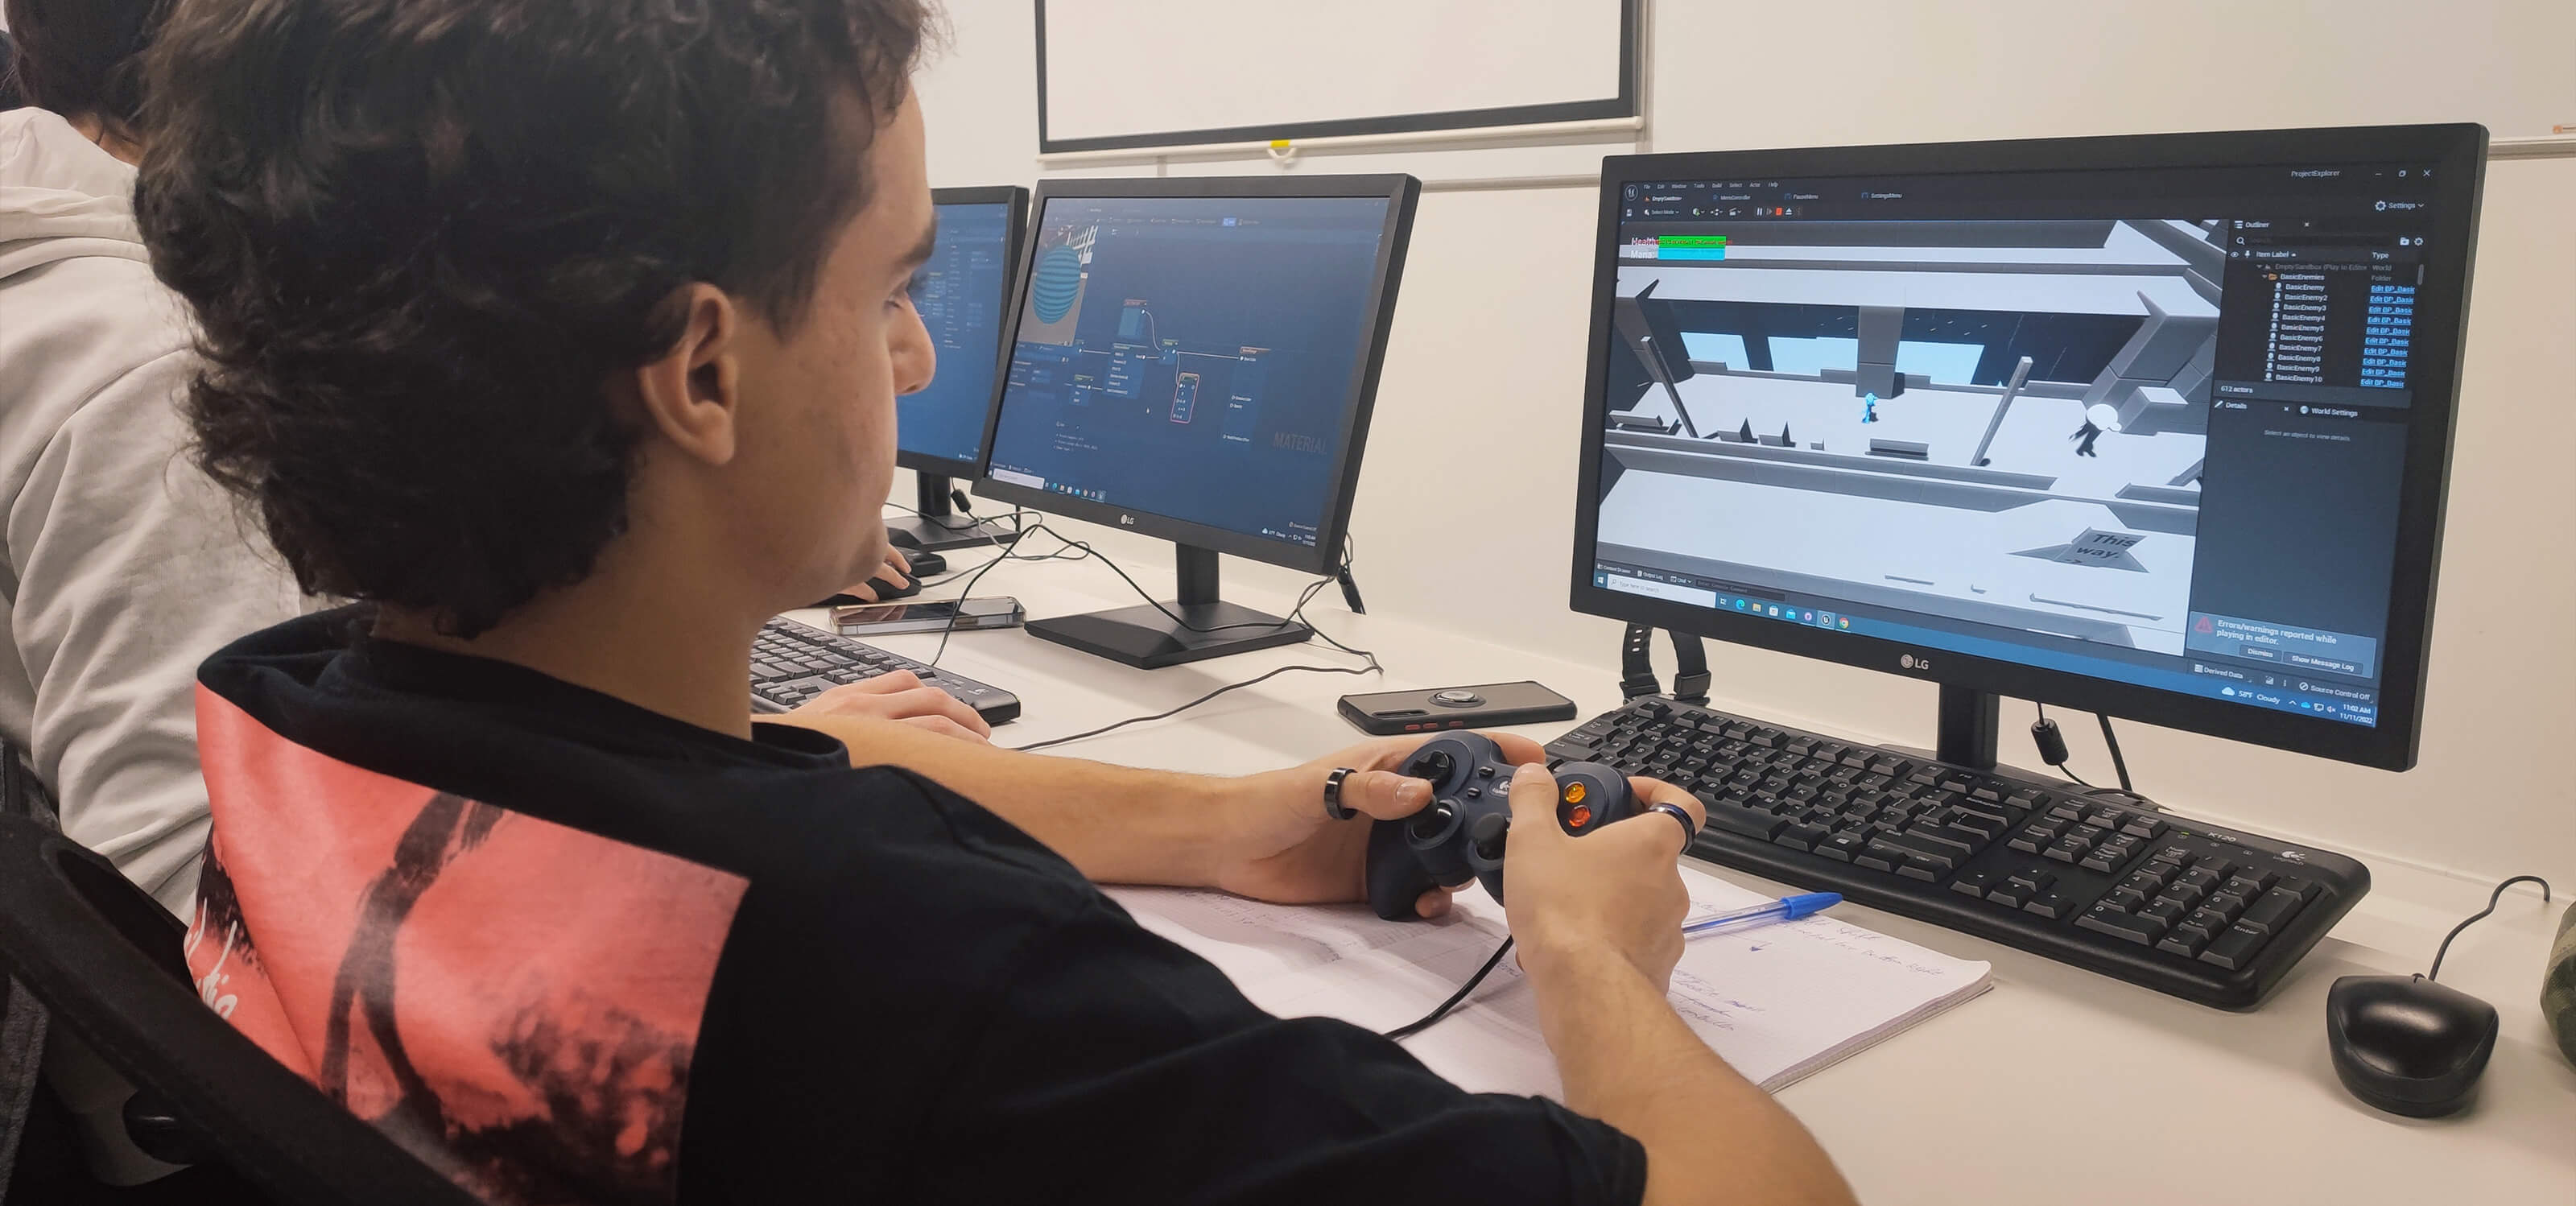 A student uses a controller to test an early build of a video game he is working on.